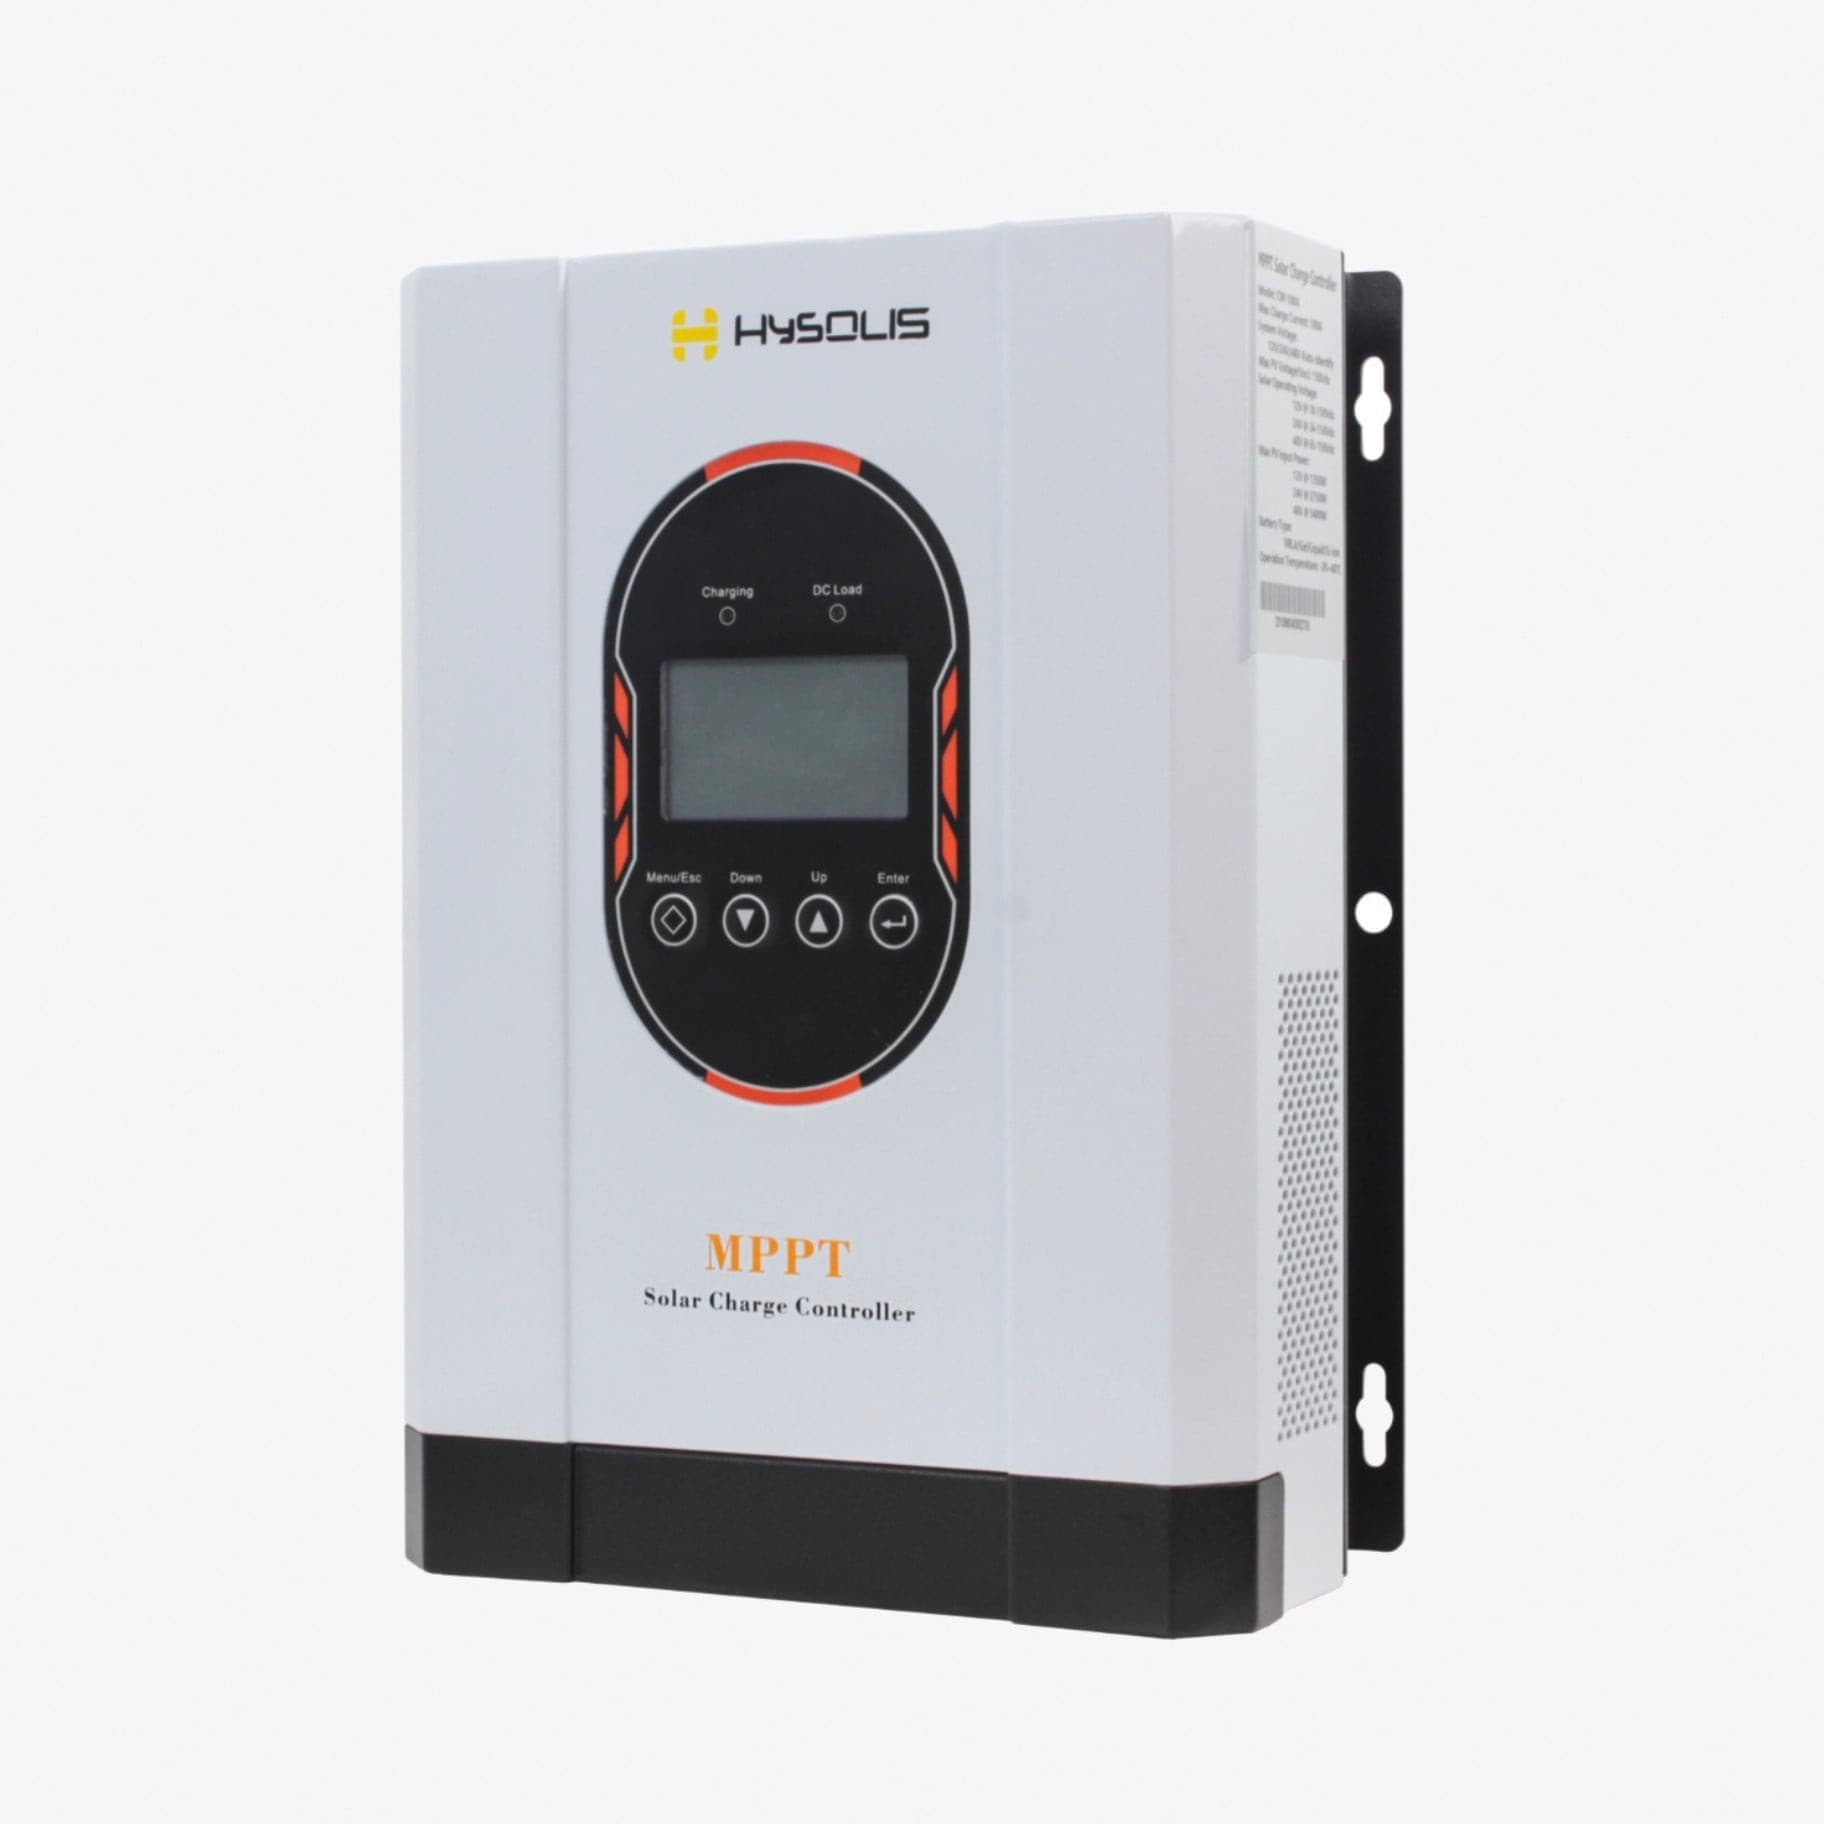 HYSOLIS|MPPT Solar Charge Controller Power Solution-EcoPowerit